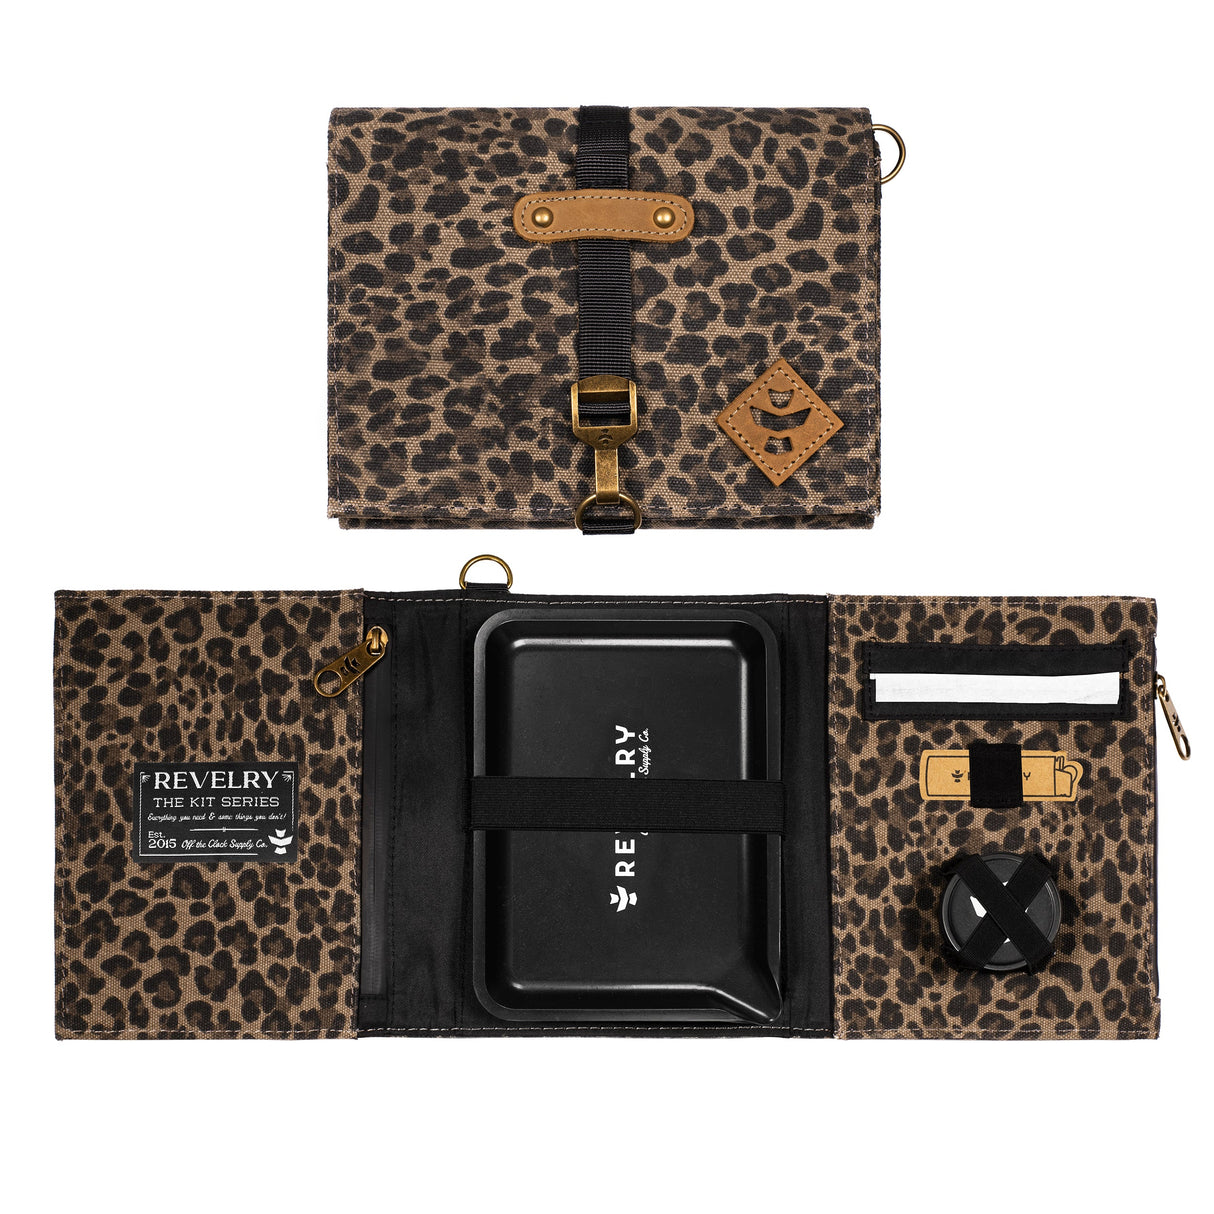 Revelry Supply The Rolling Kit in Leopard Print, Smell Proof Travel Pouch Open and Closed Views